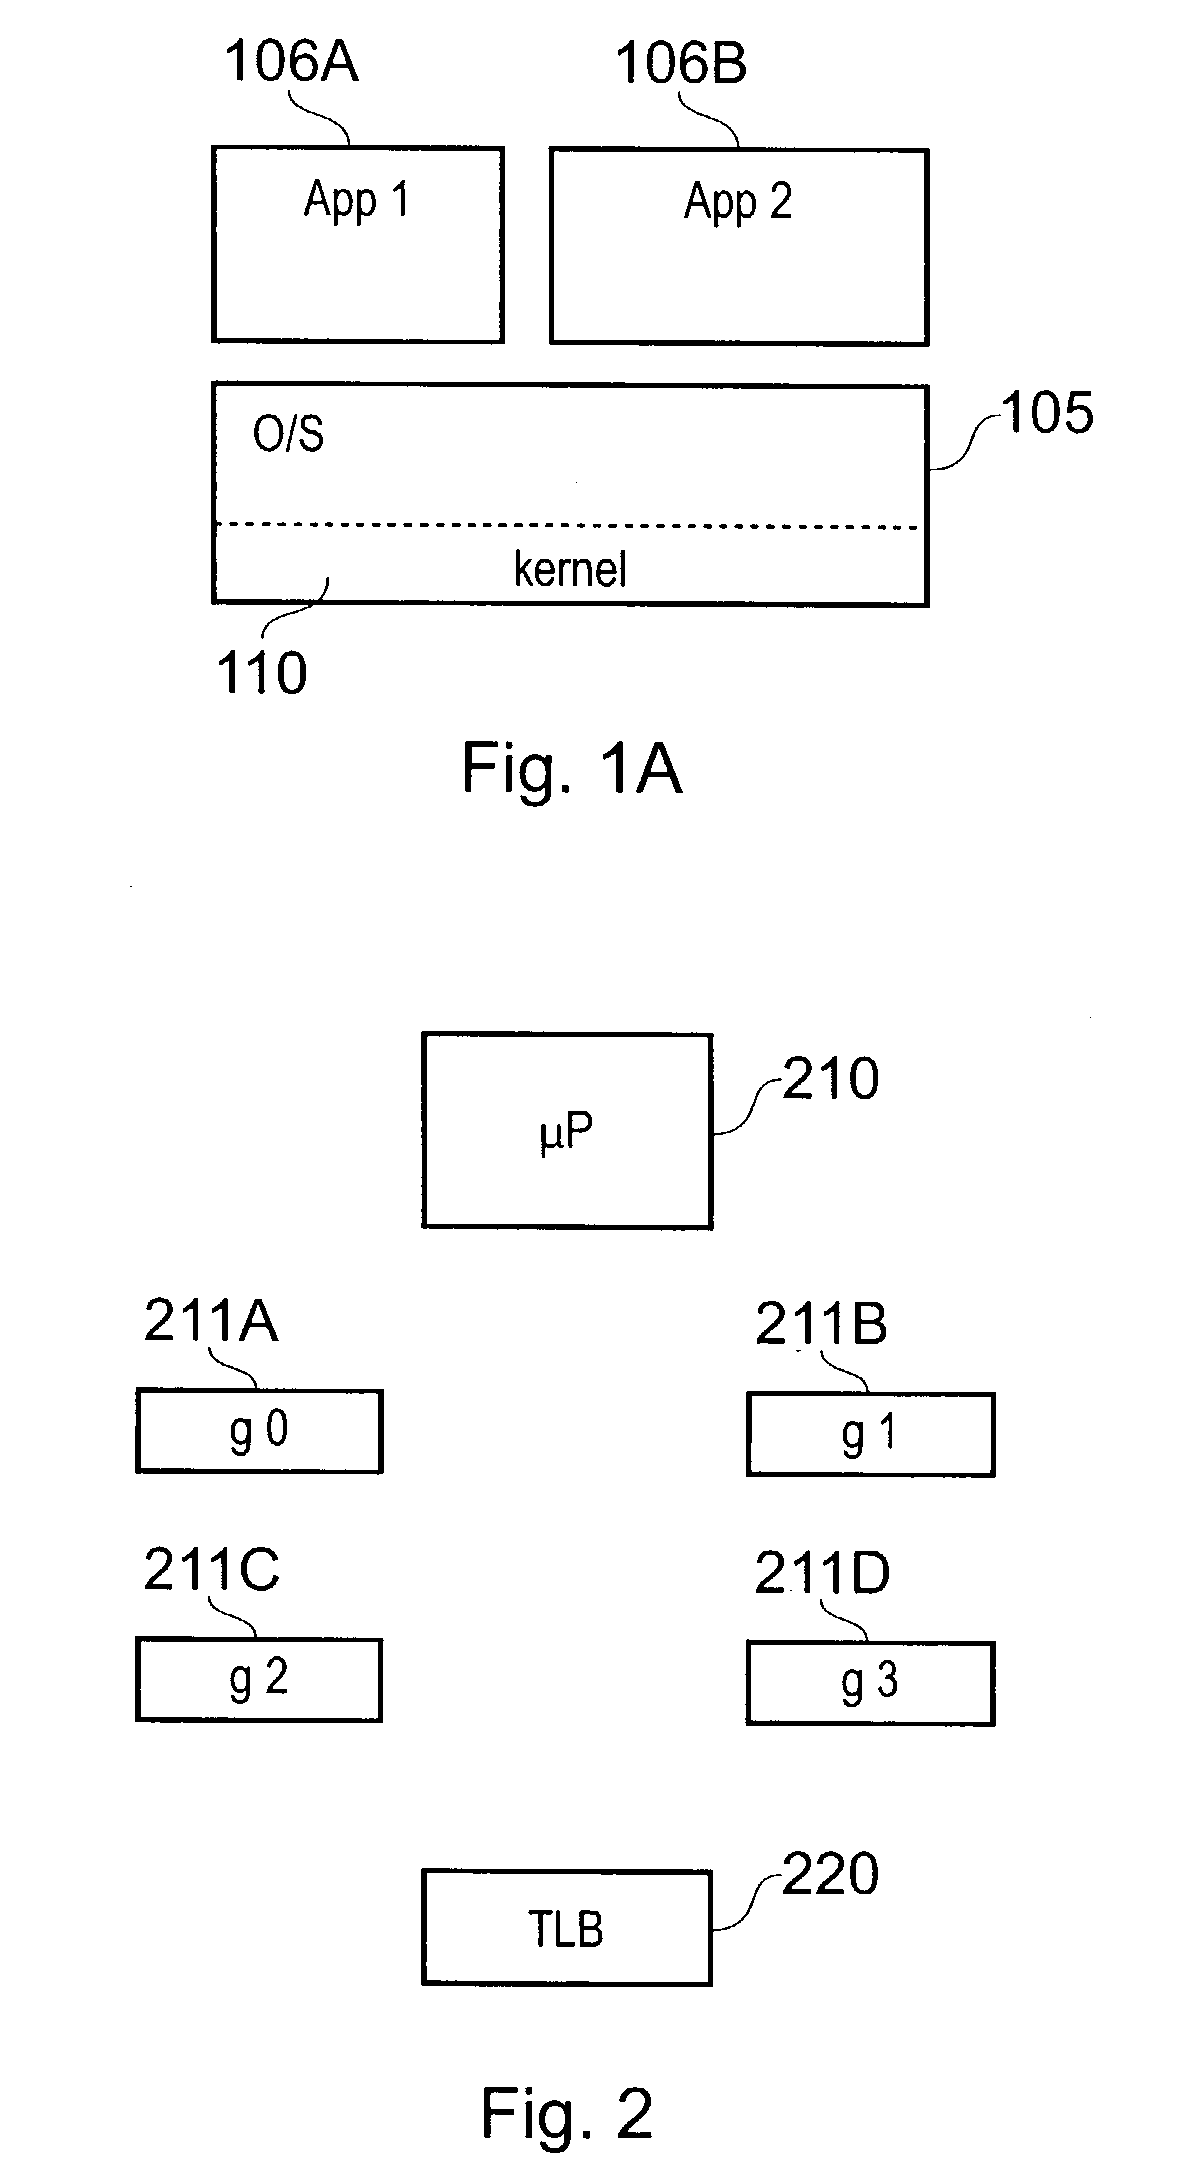 Computer system, method, and program product for performing a data access from low-level code